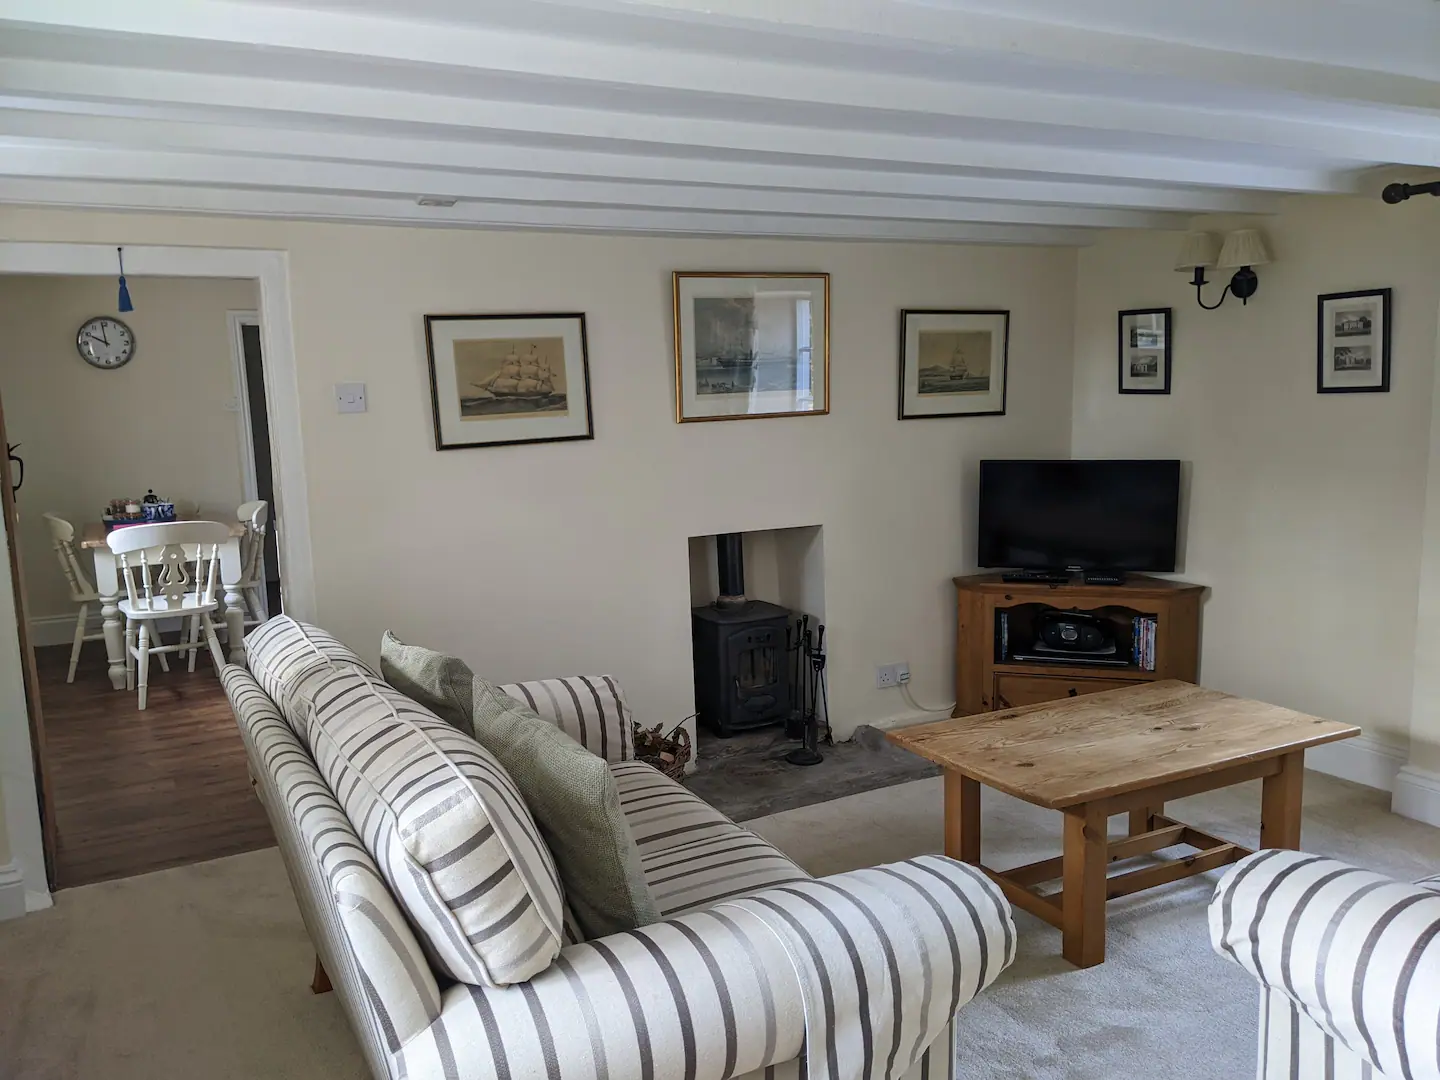 Broughtons Cottage, luxury self catering, Broughtons, forest of dean, gloucestershire, holiday cottage, self-catering, self catering cottage, holiday let, 4 star accommodation, Cheltenham, Ledbury